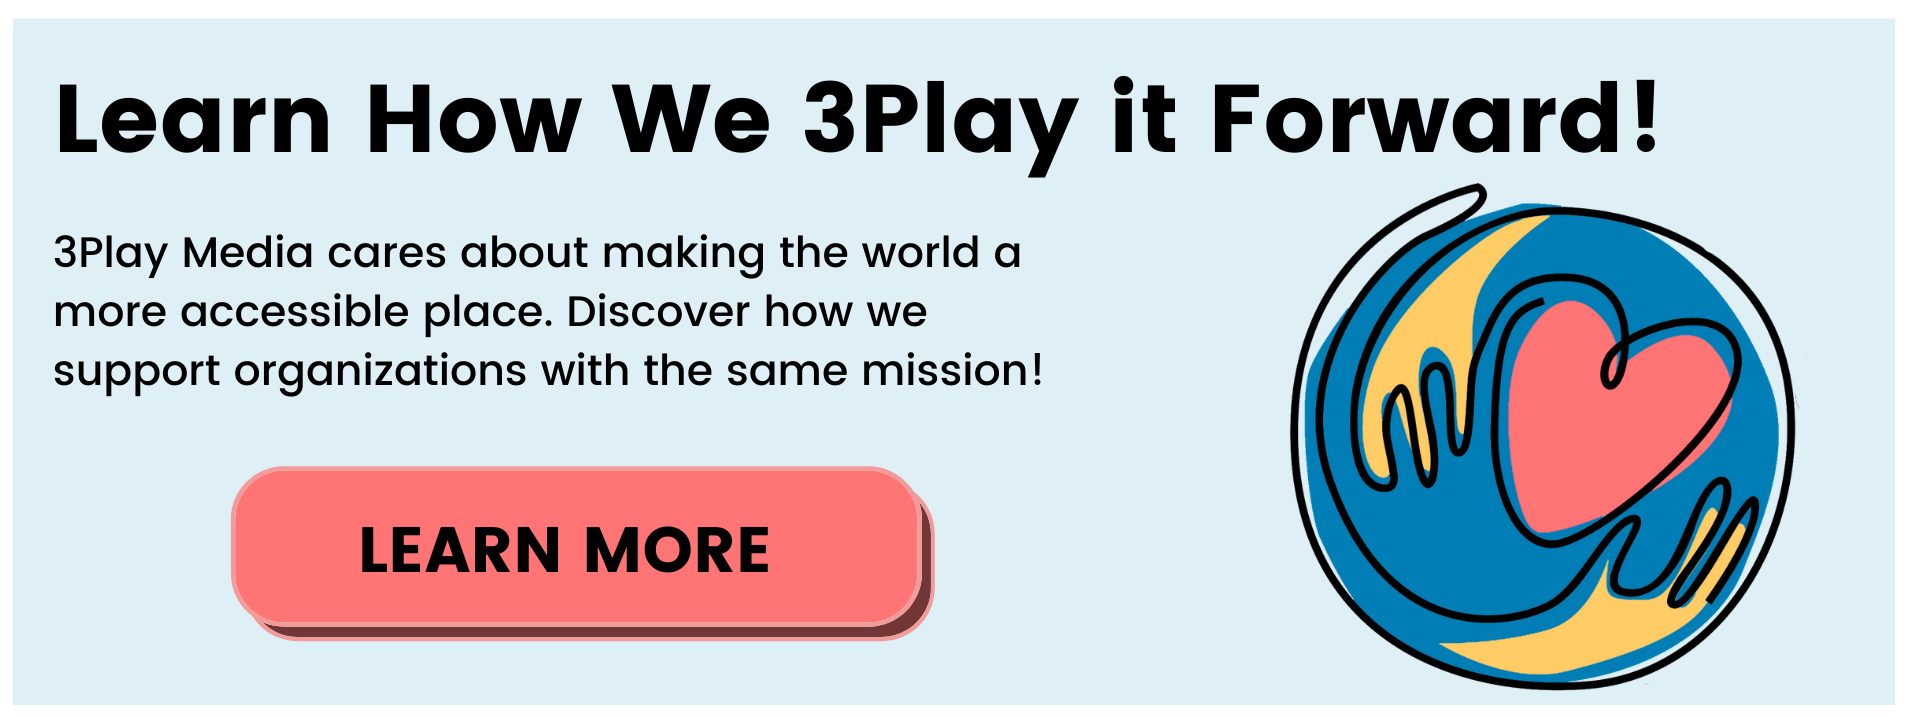 Learn how we 3Play it forward. 3Play Media cares about making the world a more accessible place. Discover how we support organizations with the same mission! Learn more. 